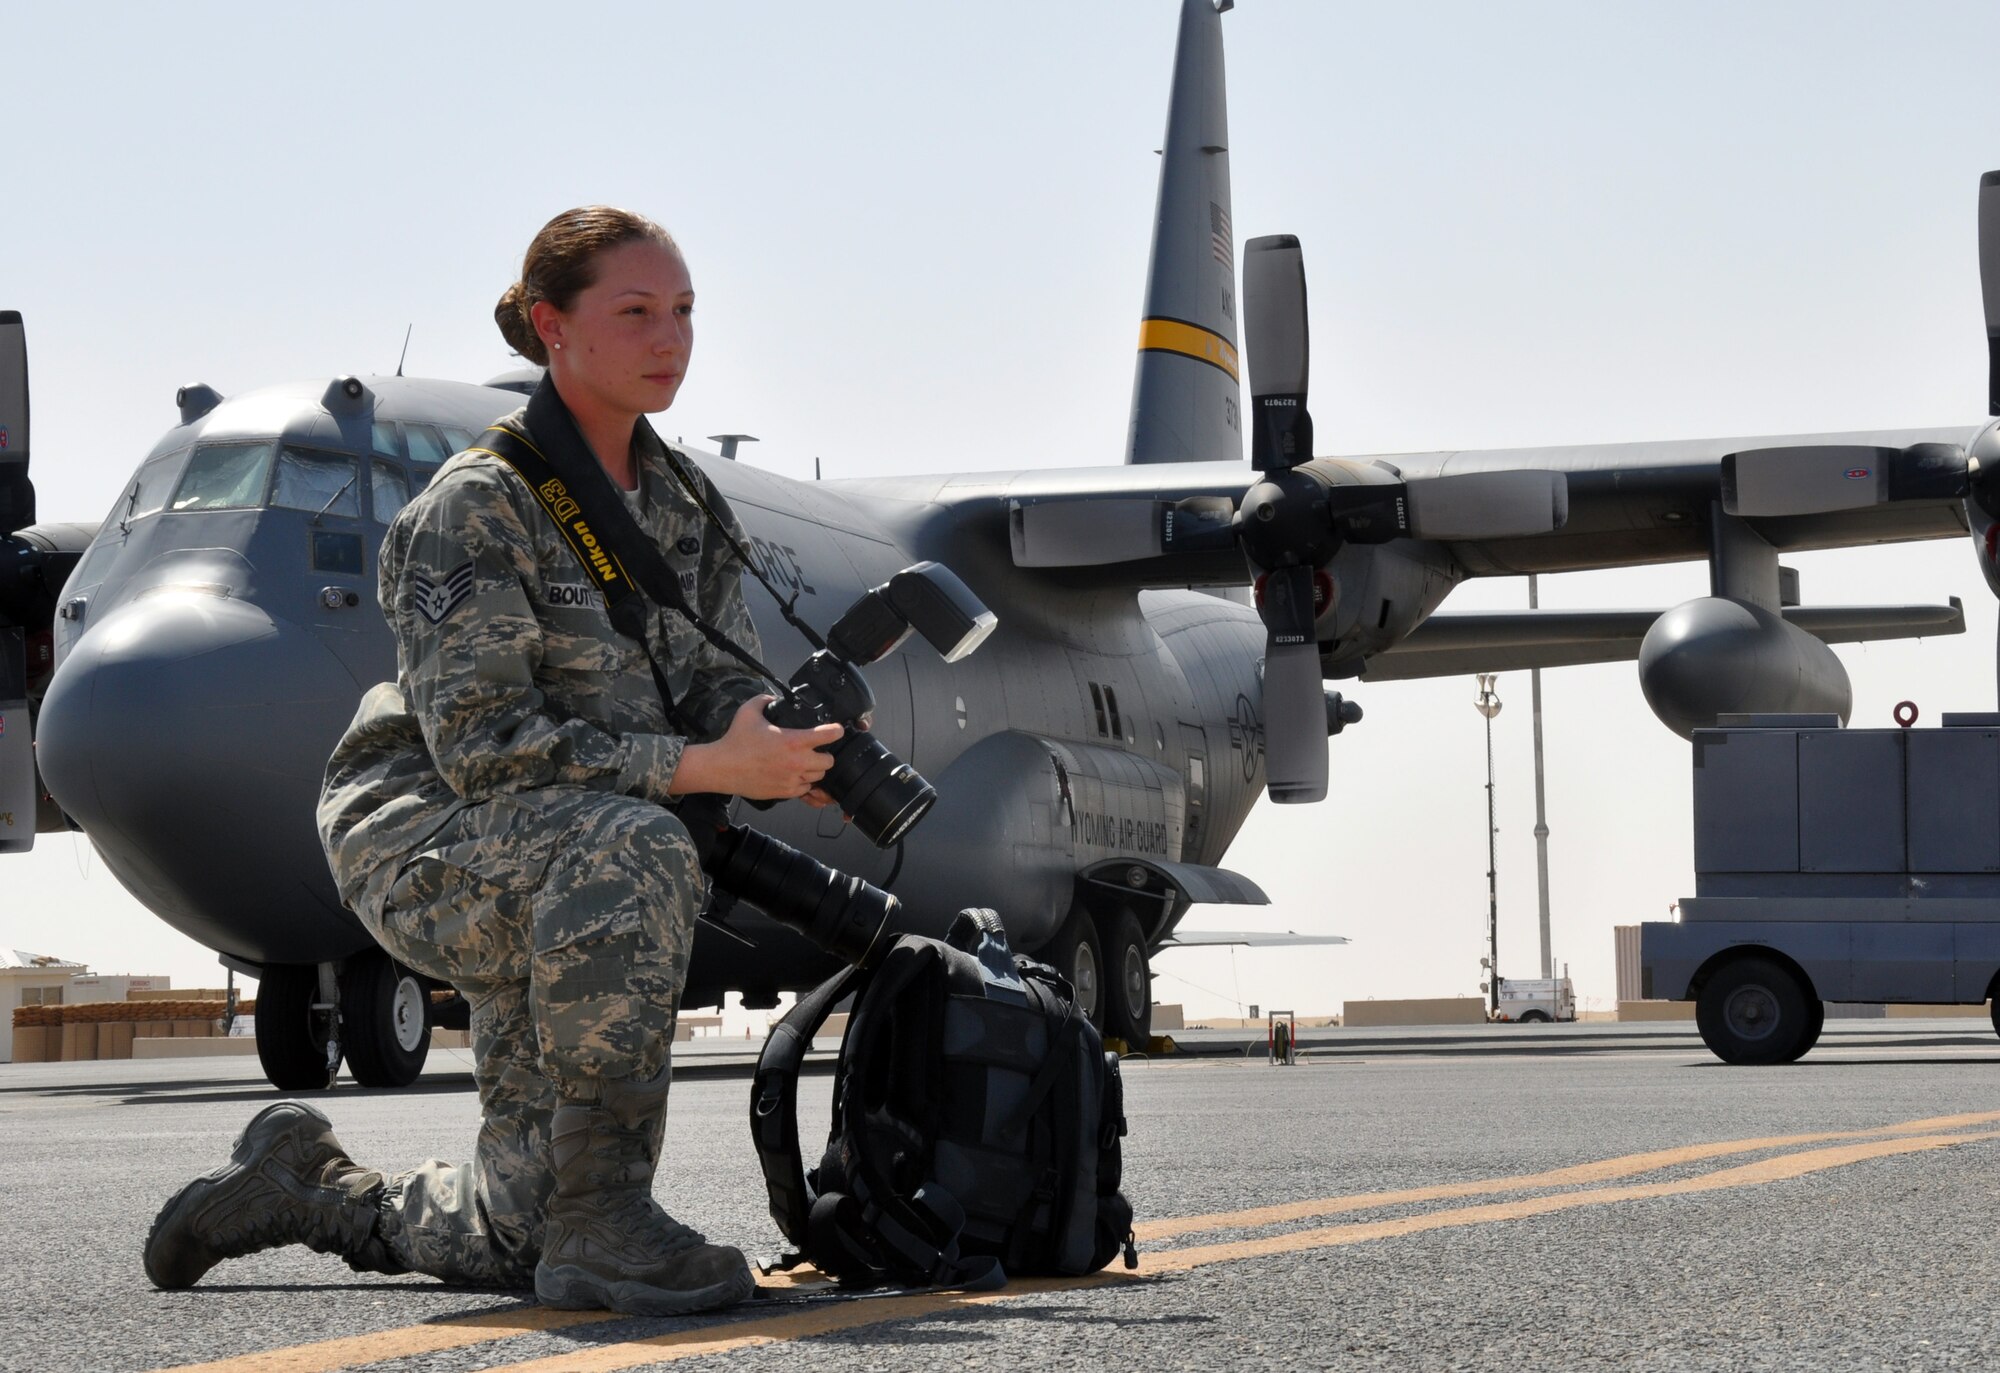 Staff Sgt. Alexandra Boutte, 386th Air Expeditionary Wing Public Affairs, prepares to photograph activity on the flightline. Sergeant Boutte’s job is telling the stories of other service members through photography, both stateside and on the frontlines. She is a photojournalist deployed from the 509th Bomb Wing Public Affairs office. (U.S. Air Force photo/ Master Sgt. Kristina Barrett) (RELEASED)